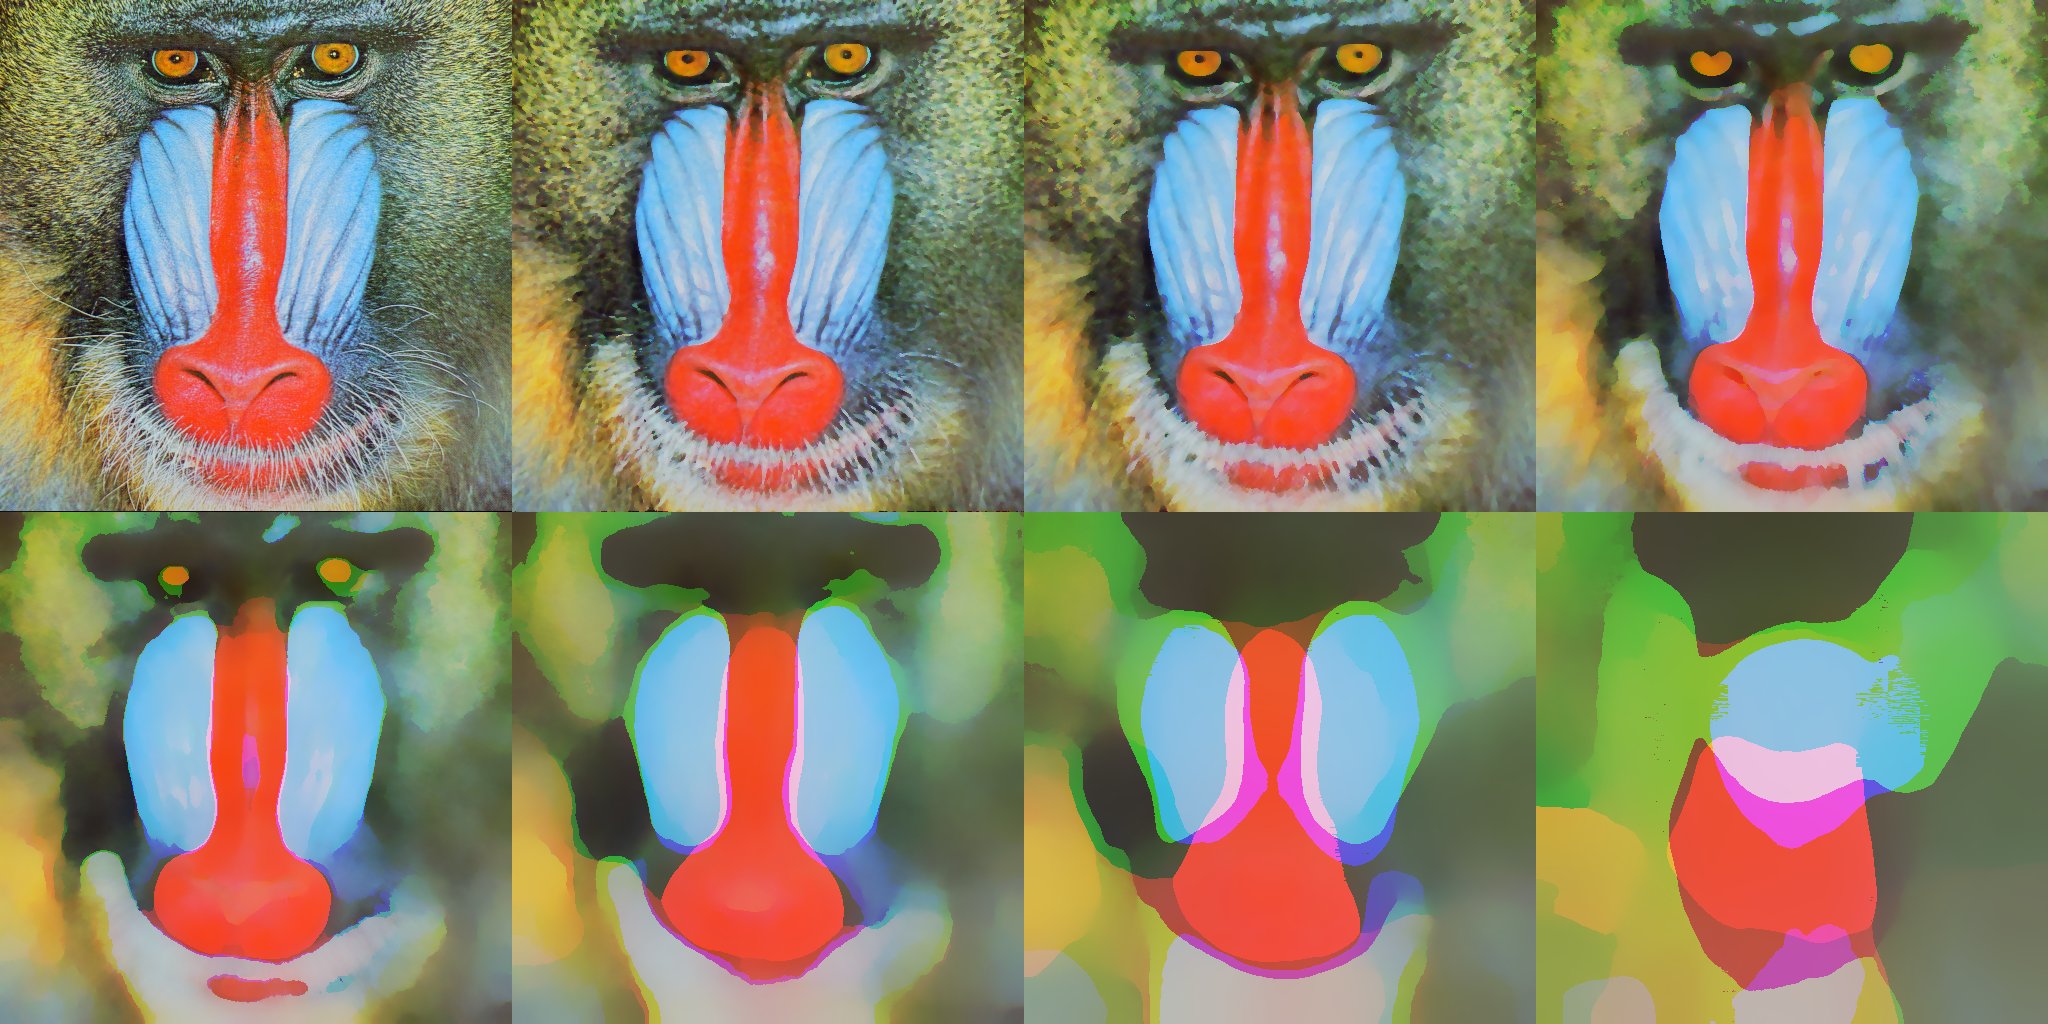 The Mandrill test image on top left, then from lef to right, the mode filter is applied with different radius